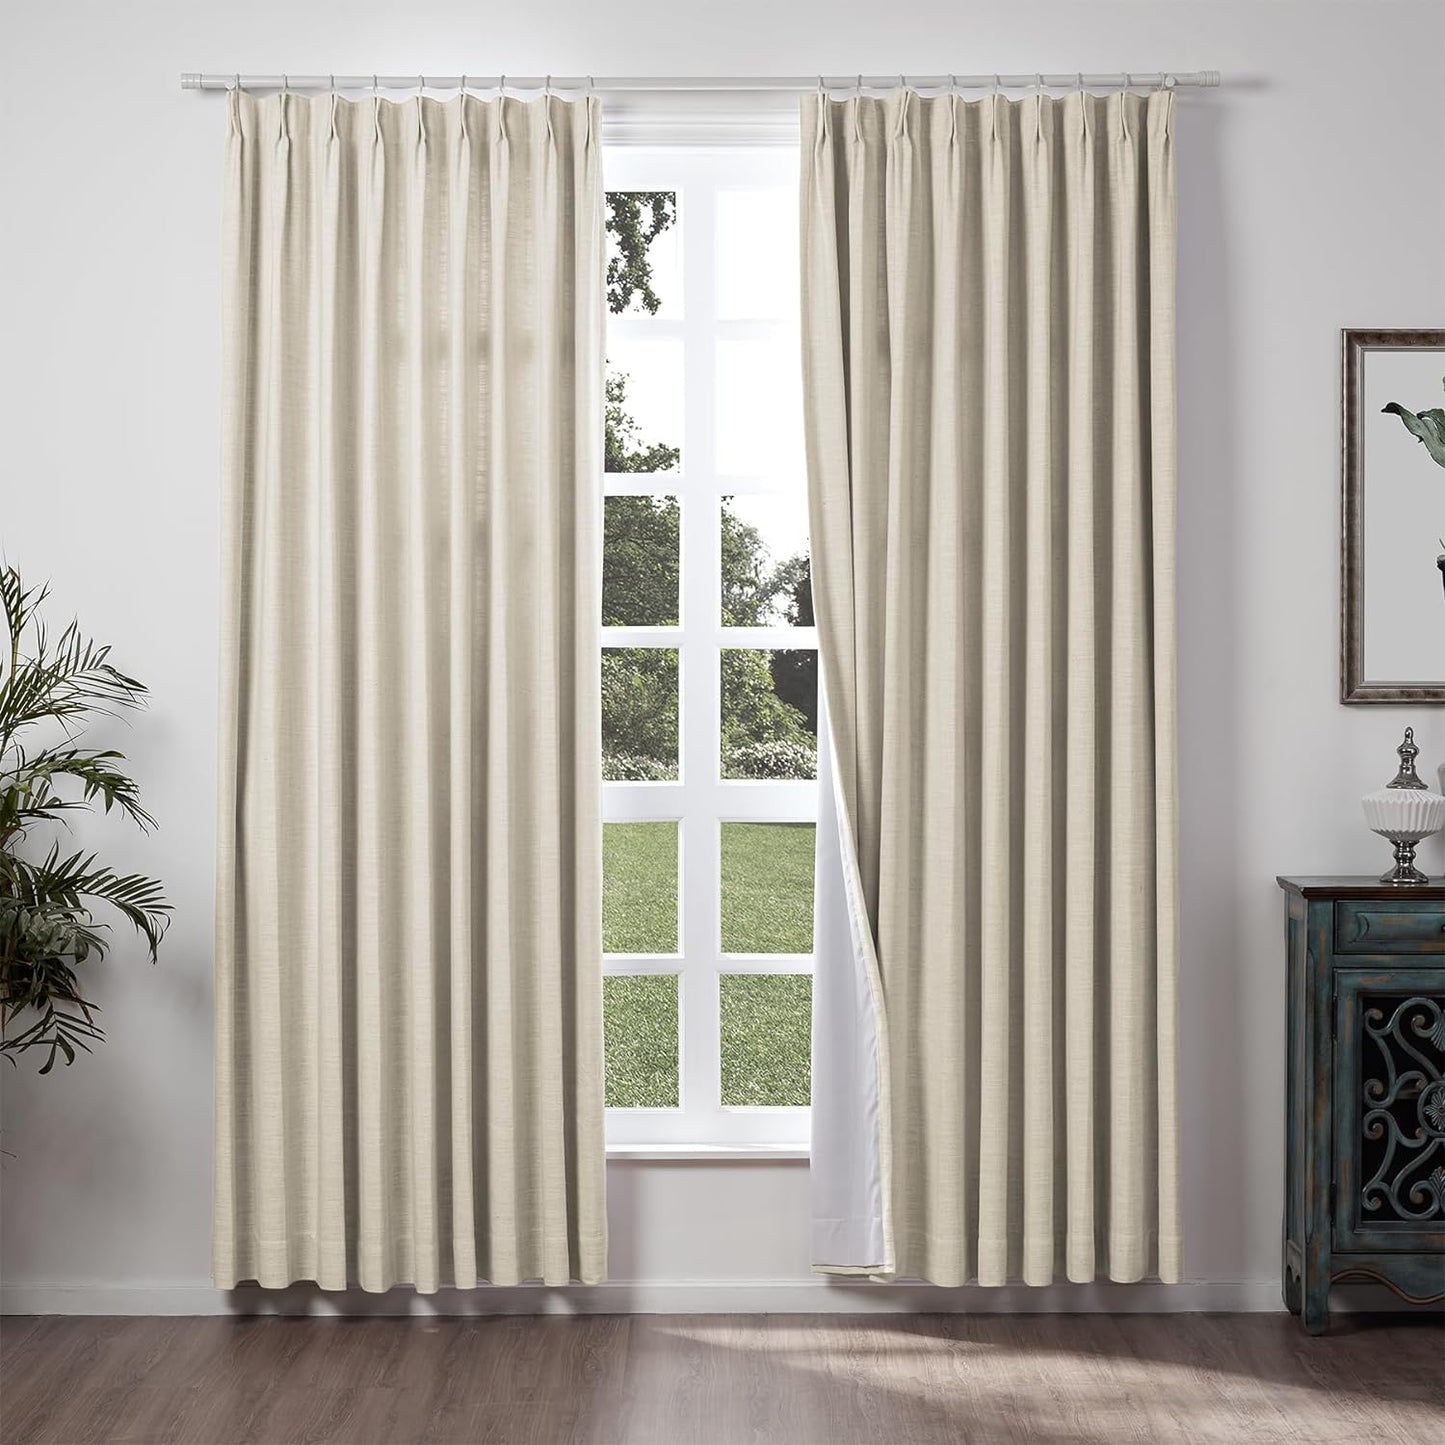 Chadmade 50" W X 84" L Polyester Linen Drape with Blackout Lining Pinch Pleat Curtain for Sliding Door Patio Door Living Room Bedroom, (1 Panel) Beige White Liz Collection  ChadMade Sand Beige (3) 50Wx84L 